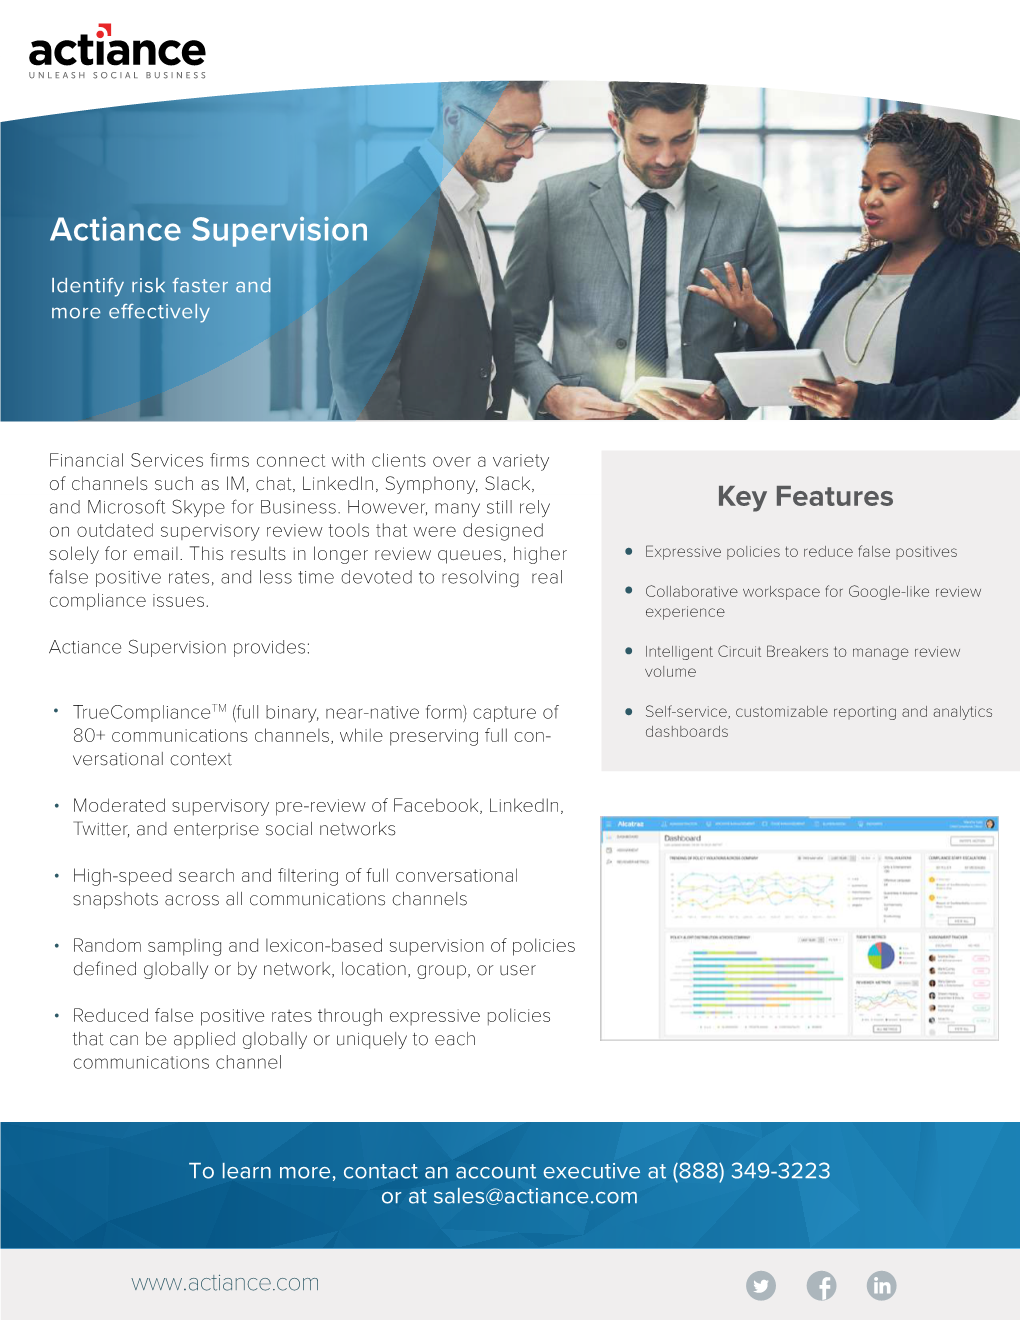 Actiance Supervision